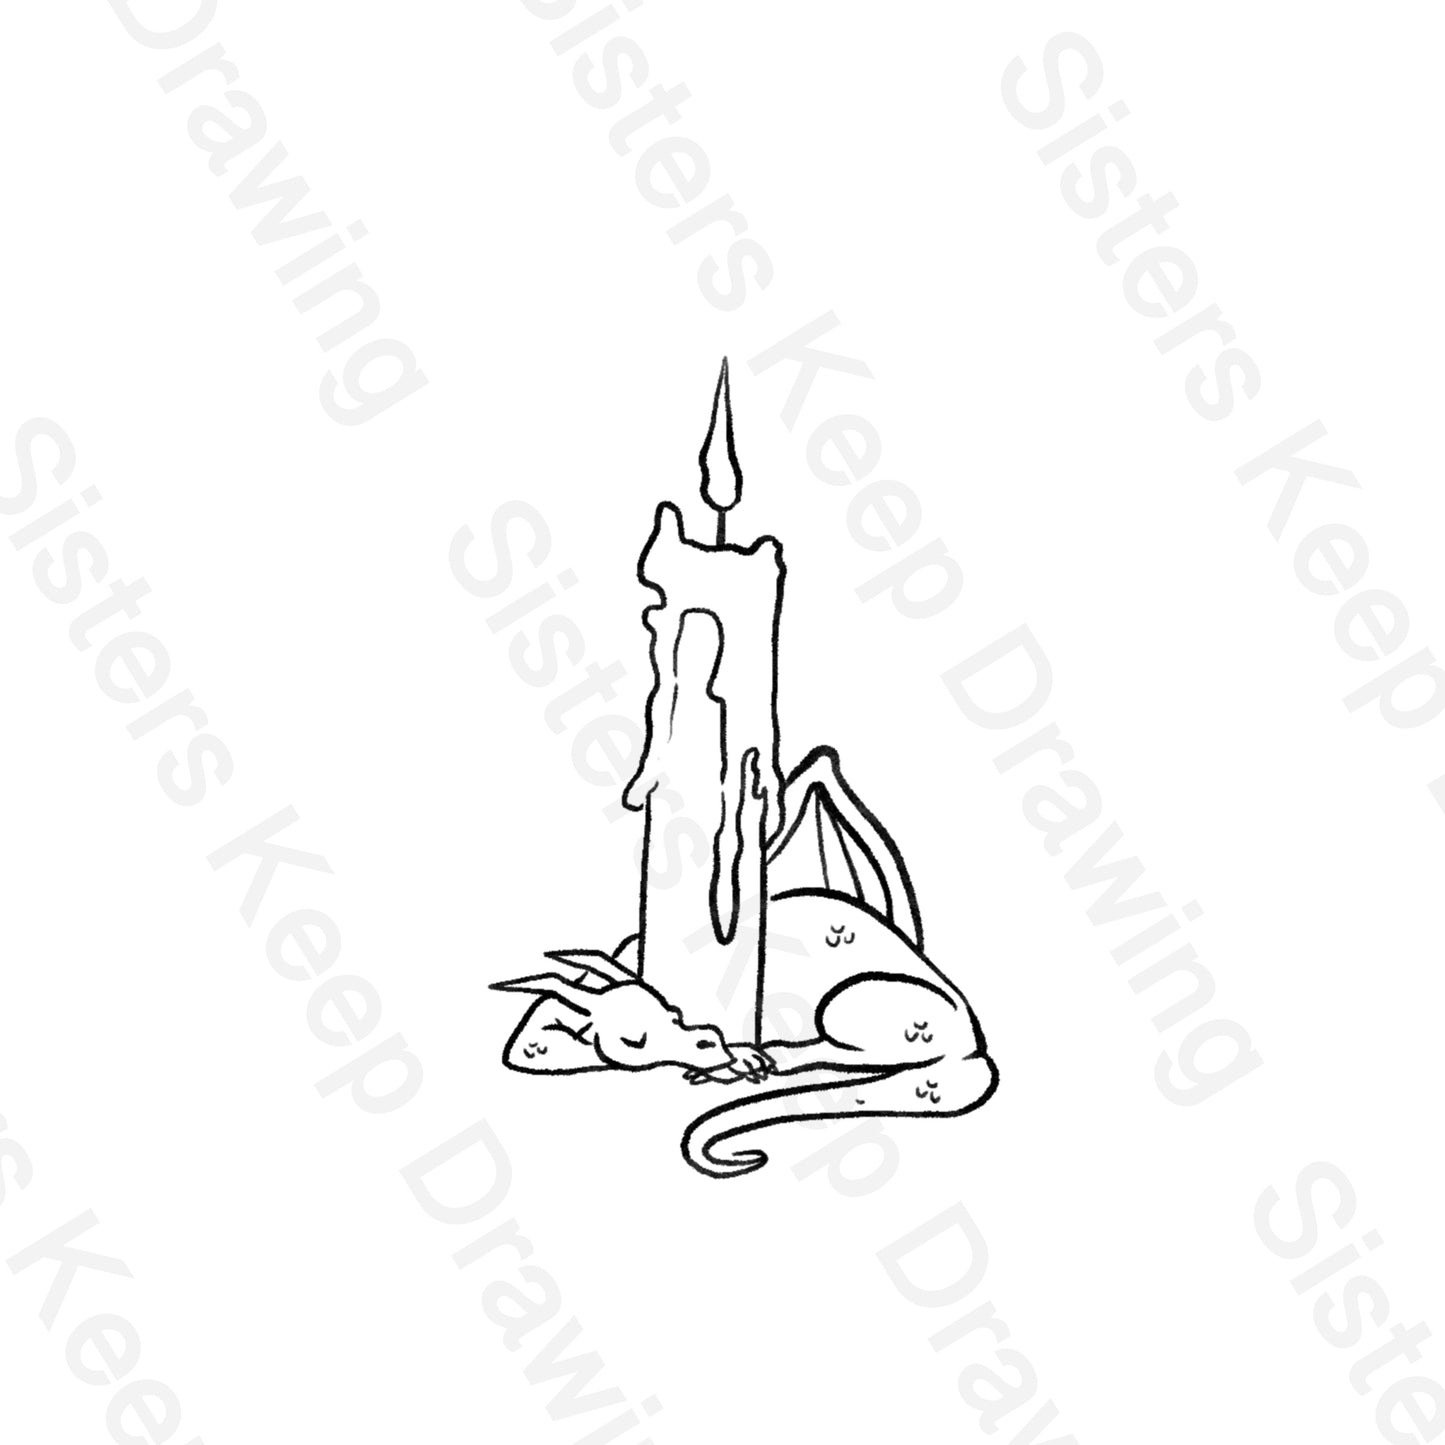 Tiny Dragon sleeping by a candle -Tattoo Transparent Permission PNG- instant download digital printable art